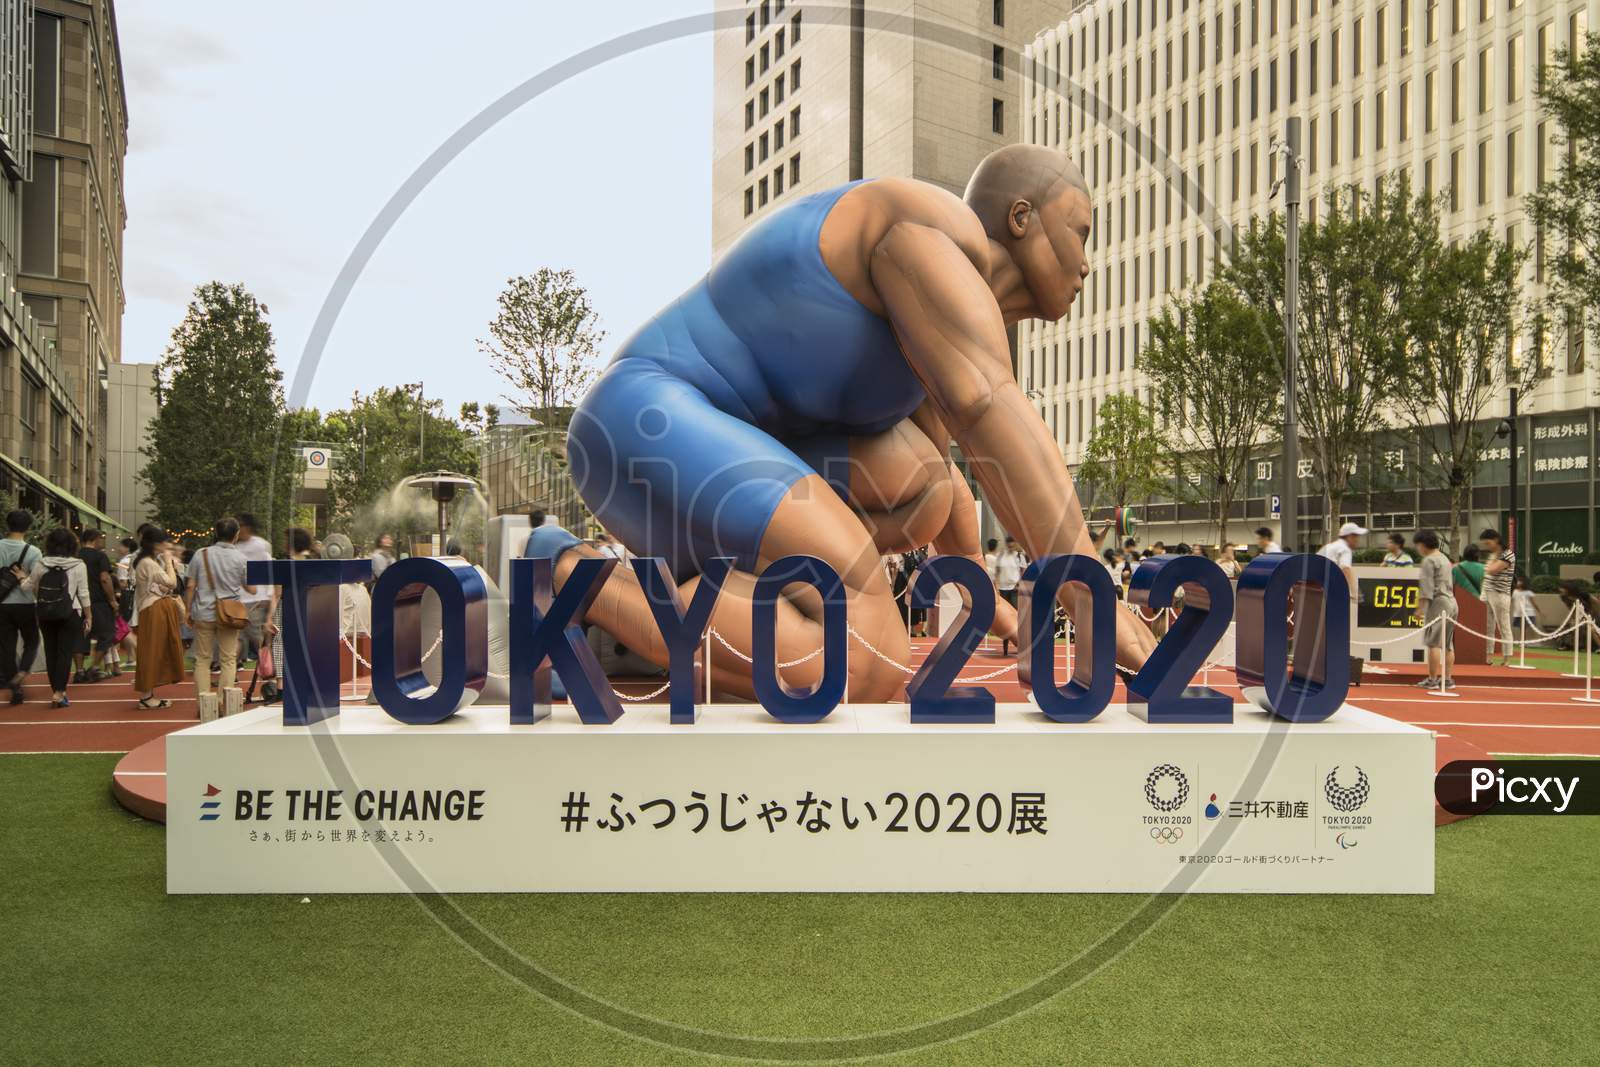 Event "Be the change Tokyo 2020" organized on the theme of the future Olympic Games in Tokyo